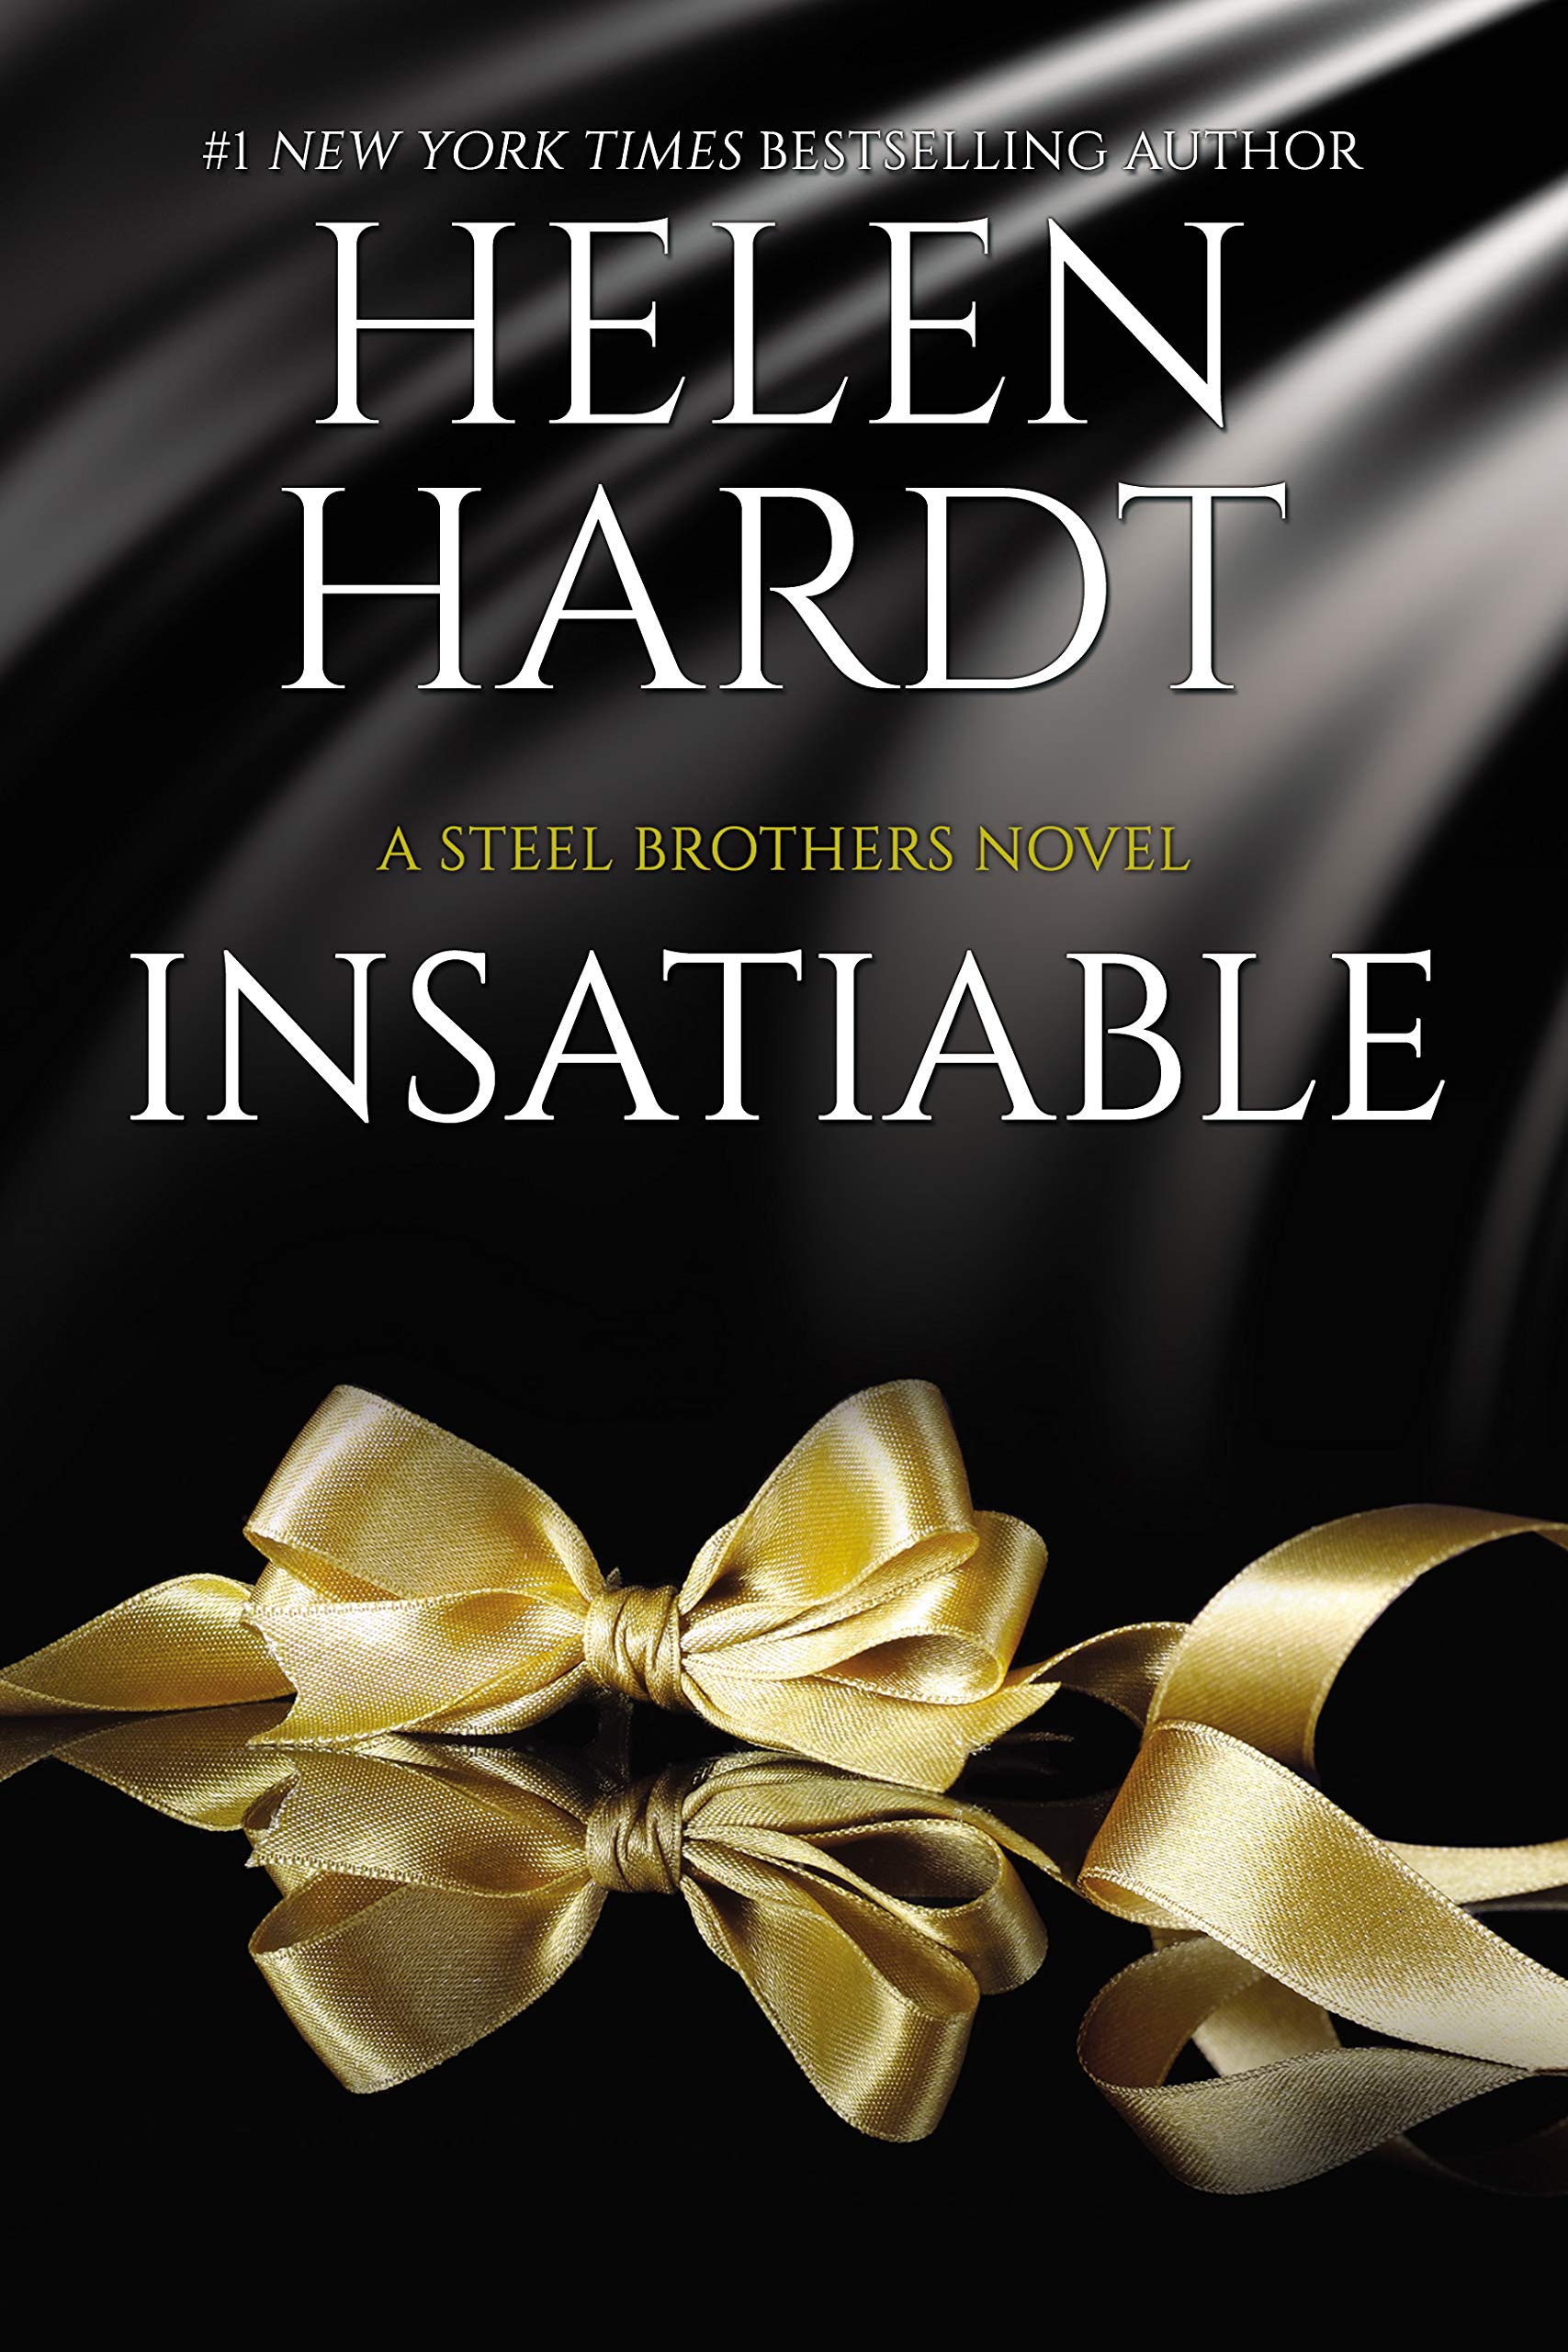 Insatiable: A Steel Brothers Saga Book 12 Out? Book Release Date